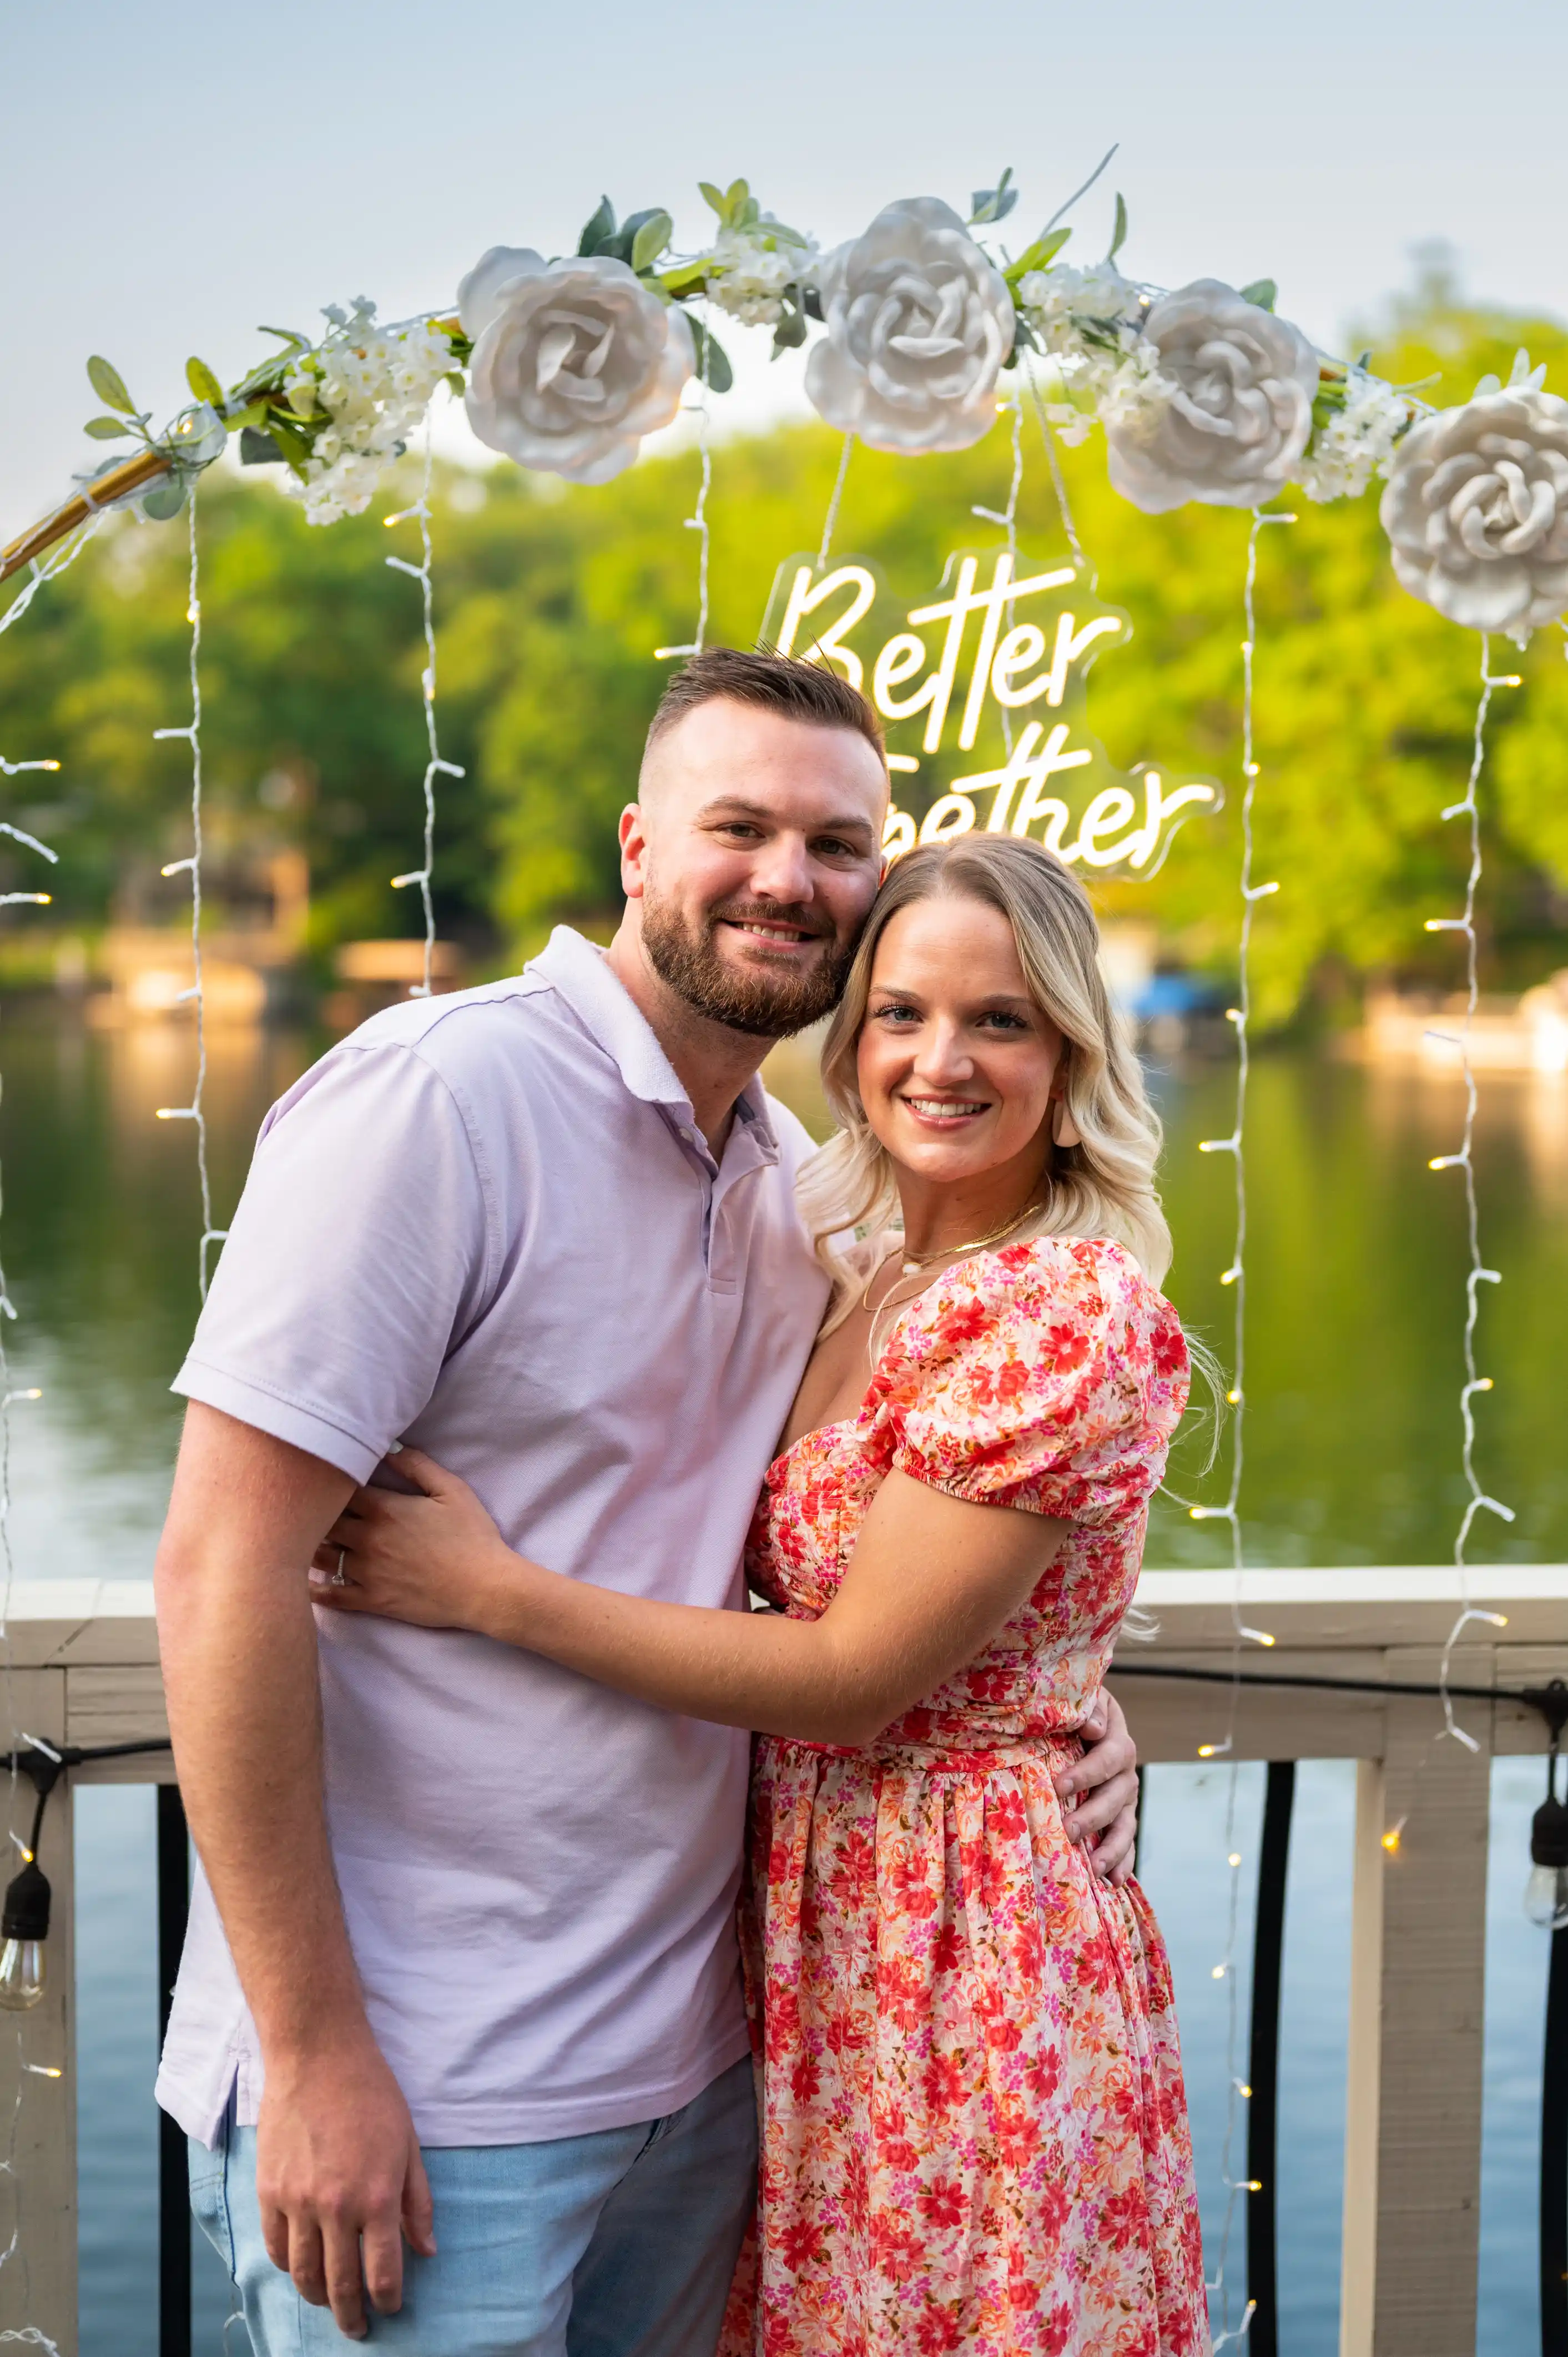 A smiling couple embracing on a lakeside dock with the phrase "Better Together" floating above them.